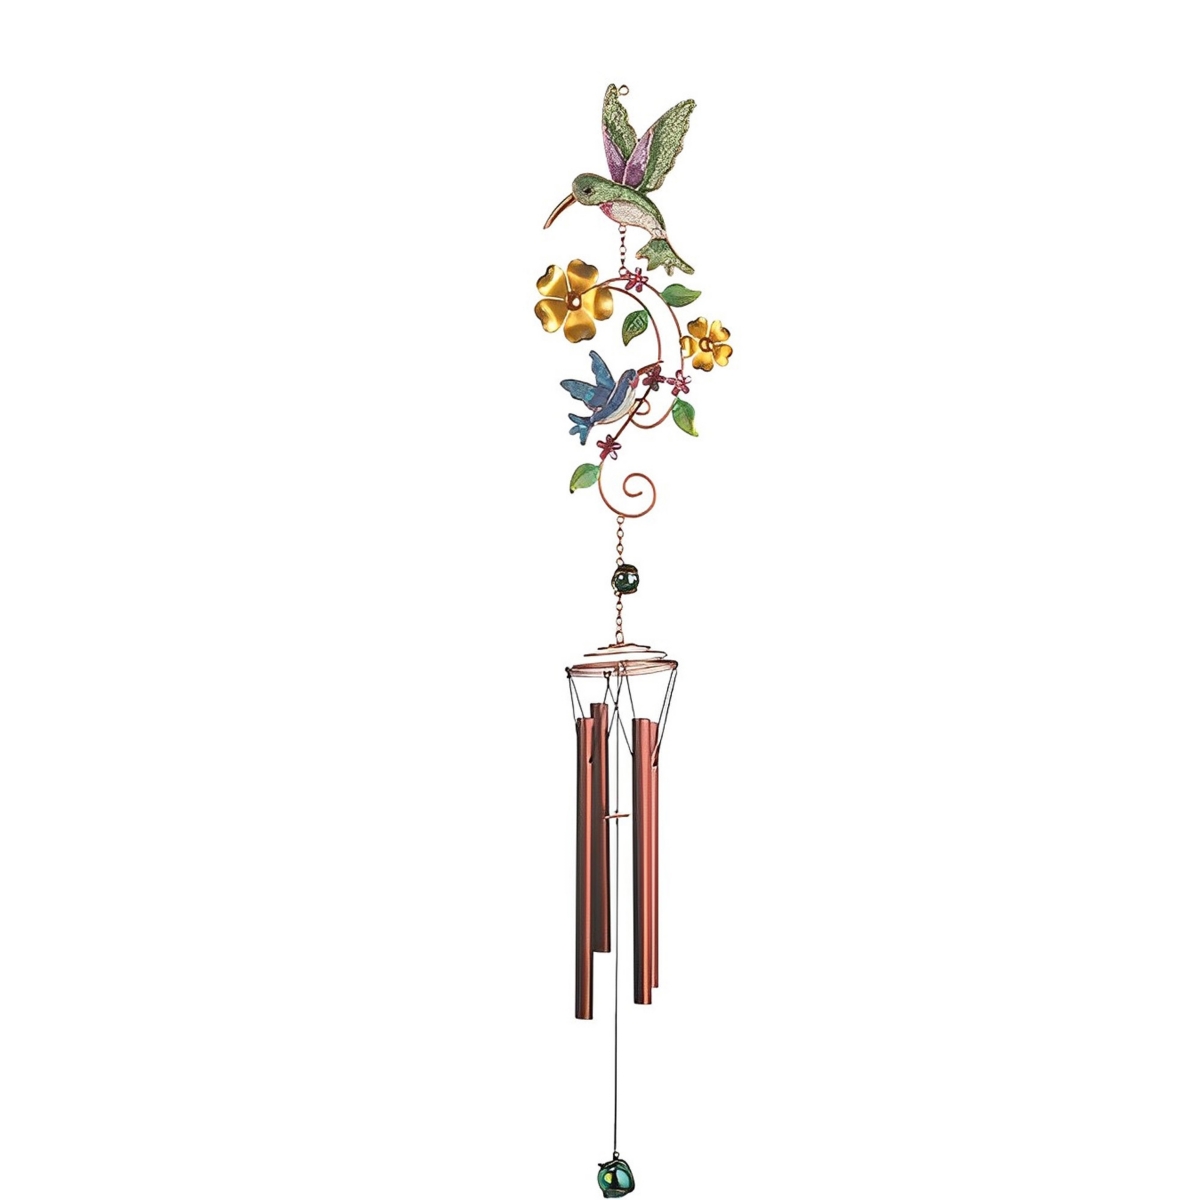 34" Long Hummingbird with Flower Suncatcher Wind Chime Home Decor Perfect Gift for House Warming, Holidays and Birthdays - Multi